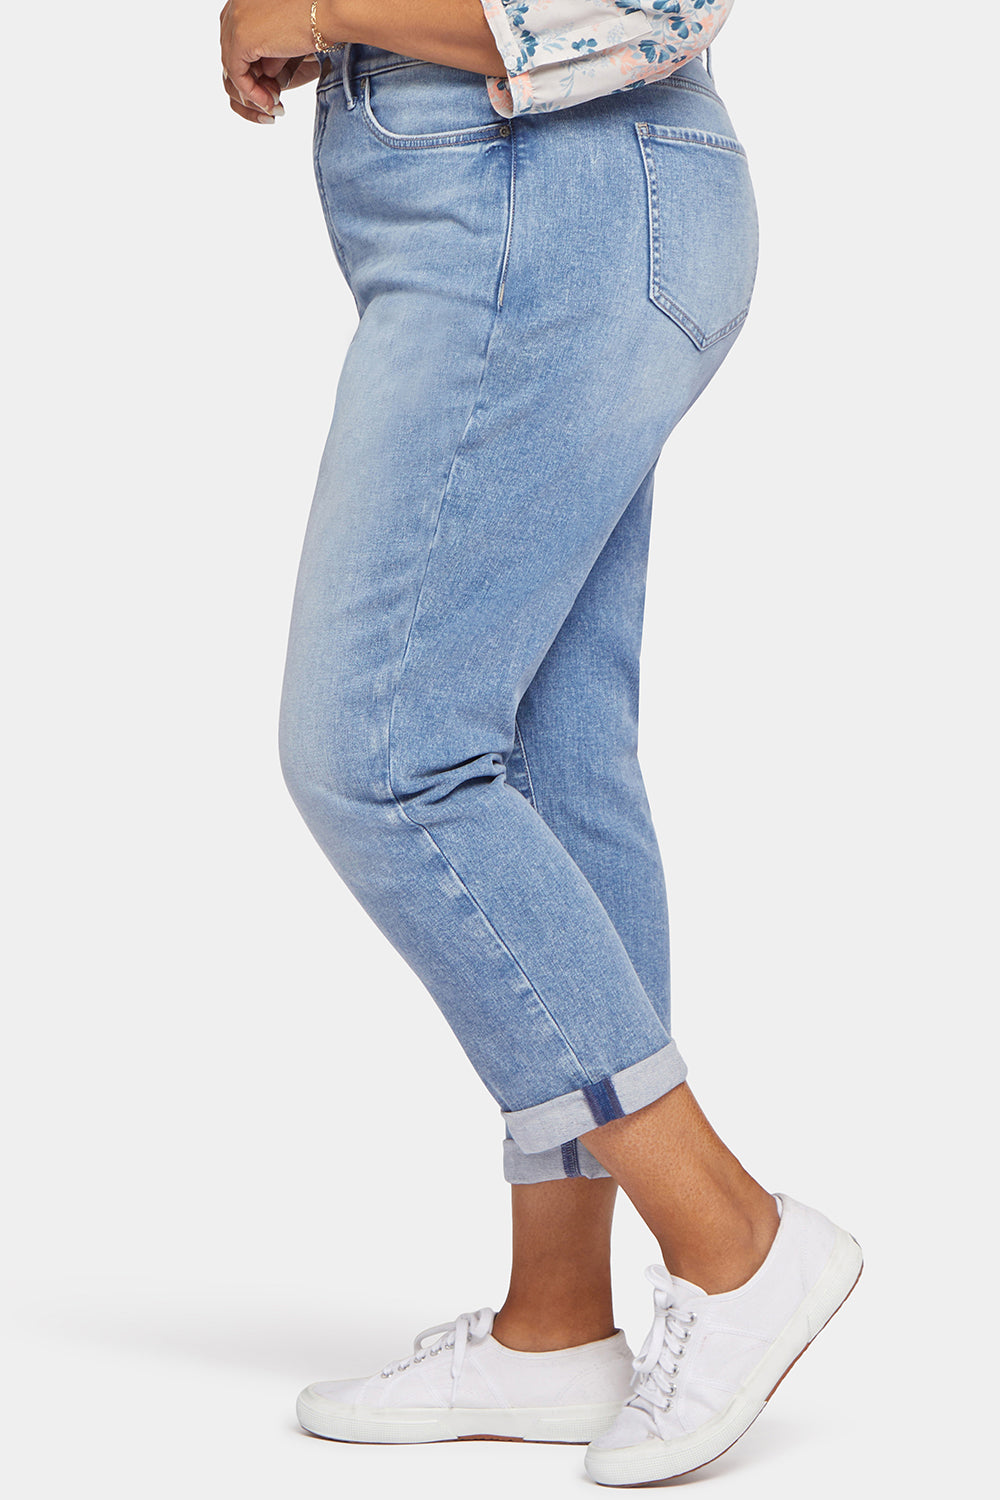 NYDJ Margot Girlfriend Jeans In Plus Size With Roll Cuffs - Quinta